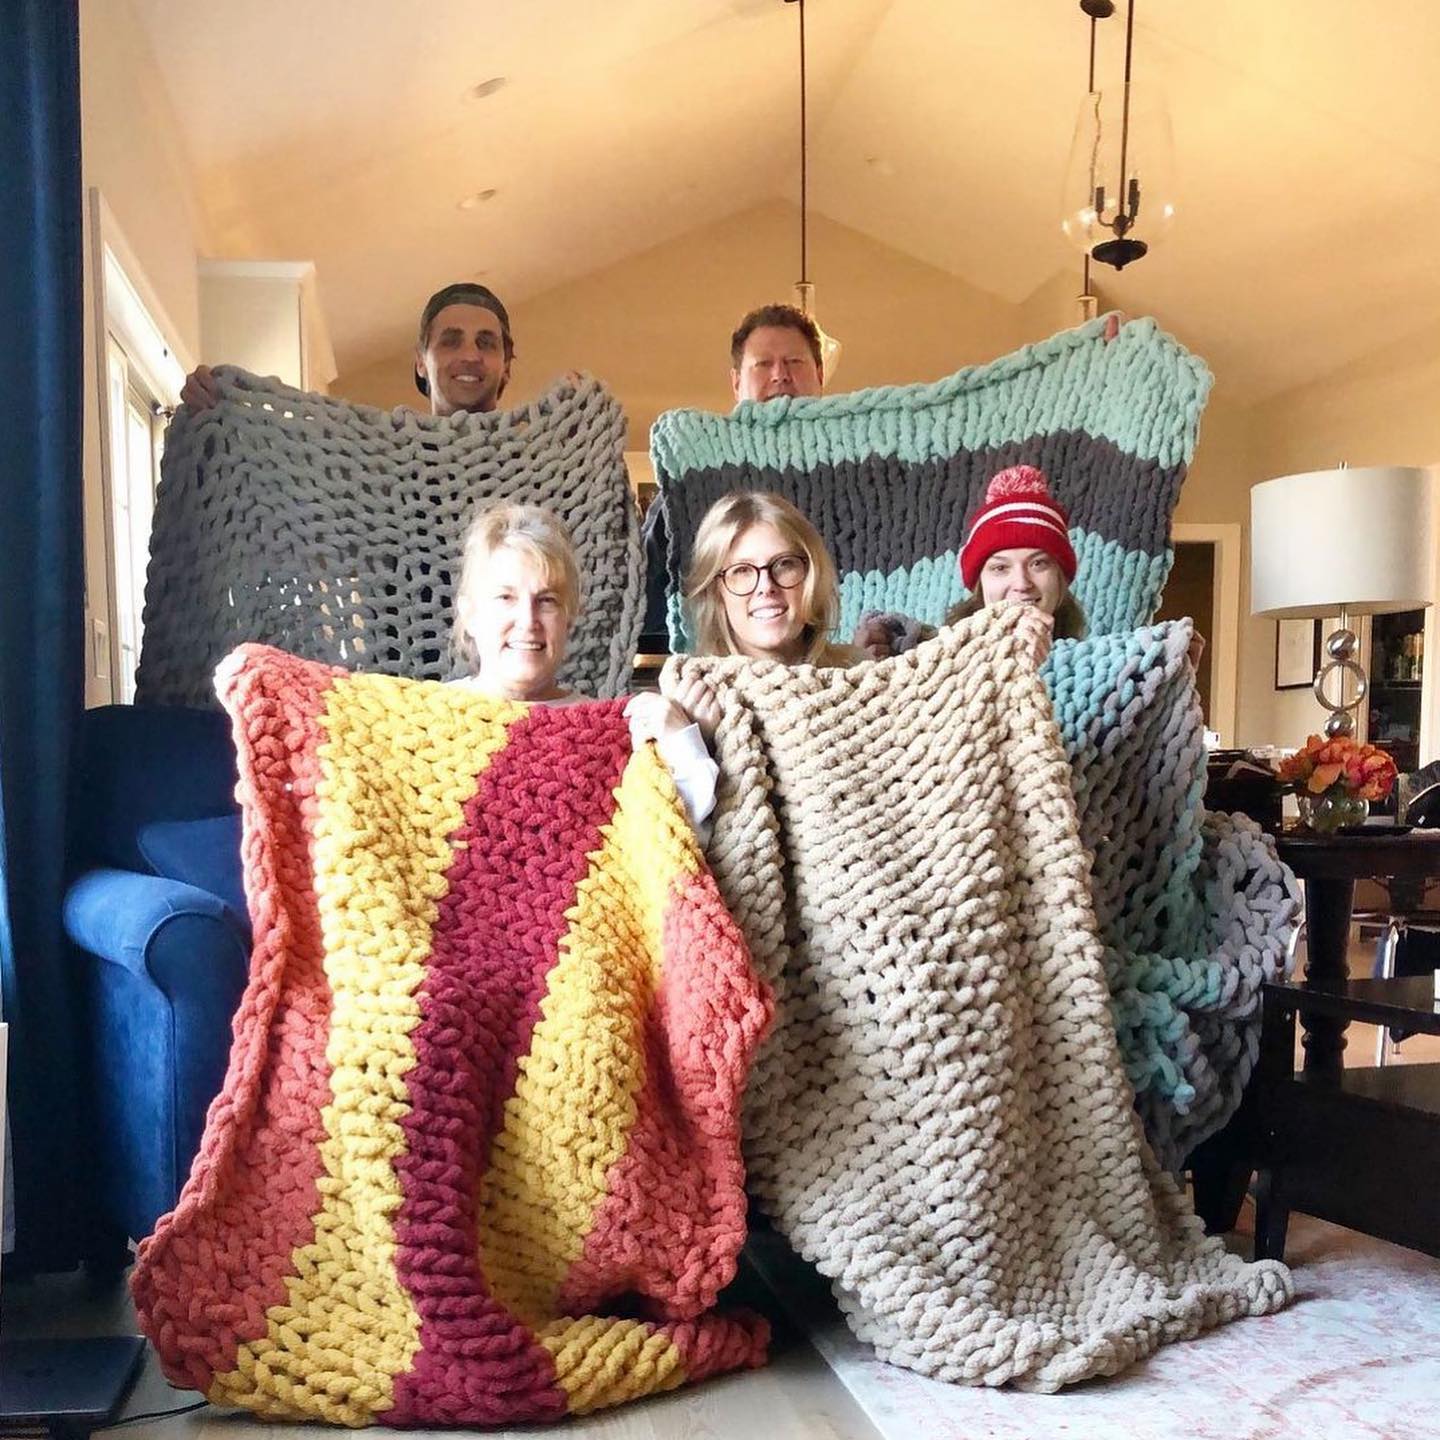 A Chunky Blanket Making Workshop Friends Night Out experience project by Yaymaker